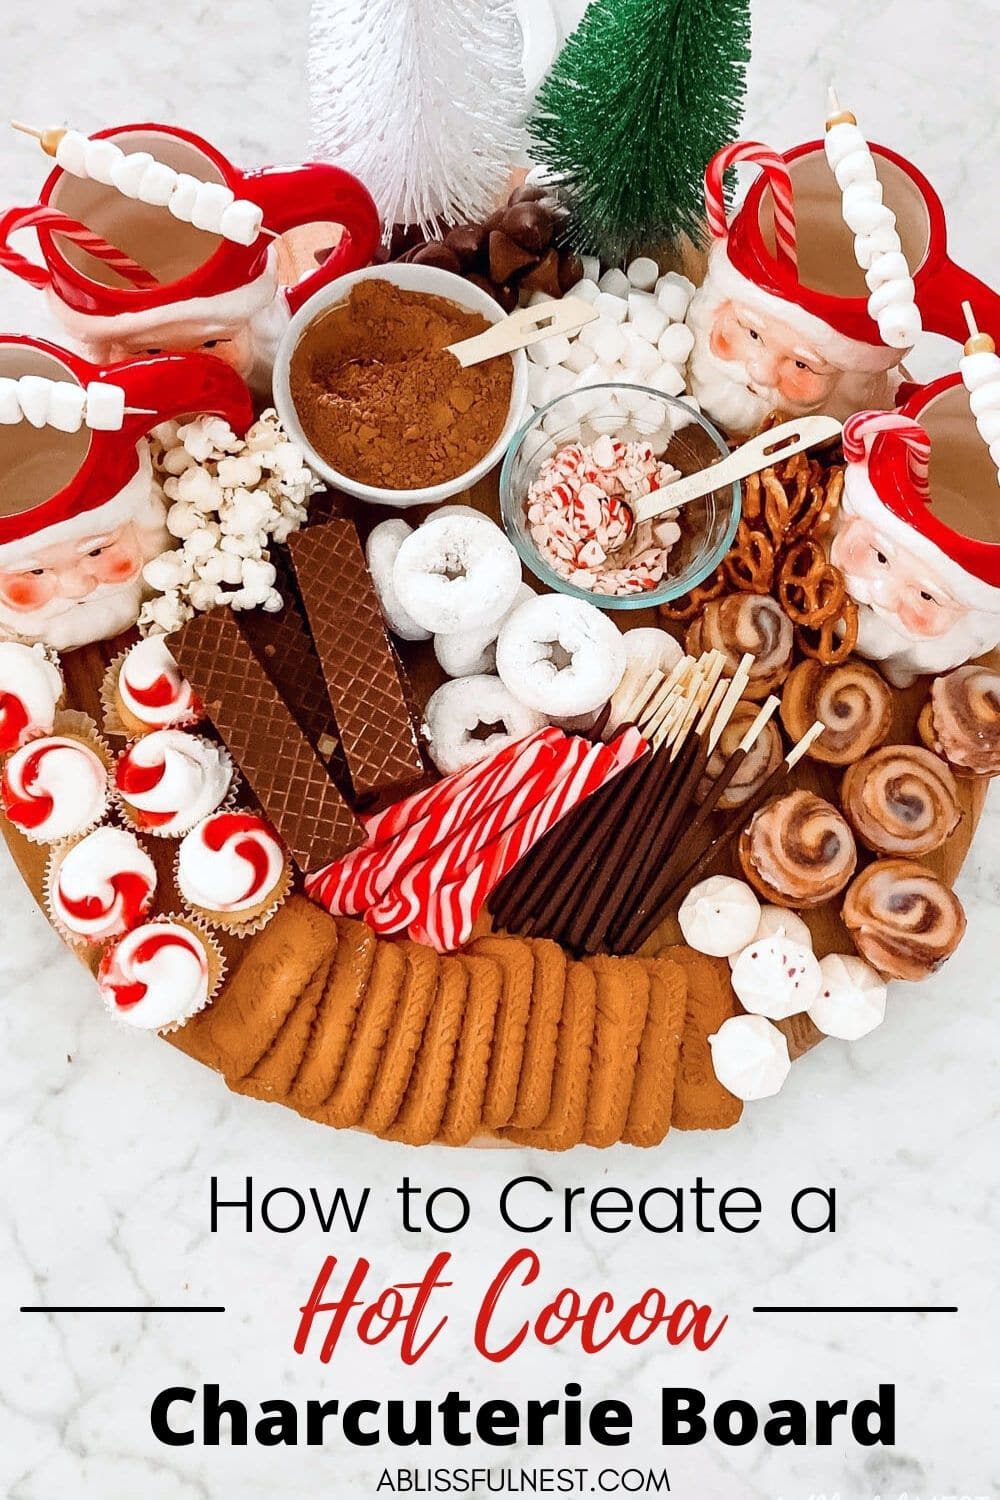 A cutting board filled with ingredients to make a hot chocolate.